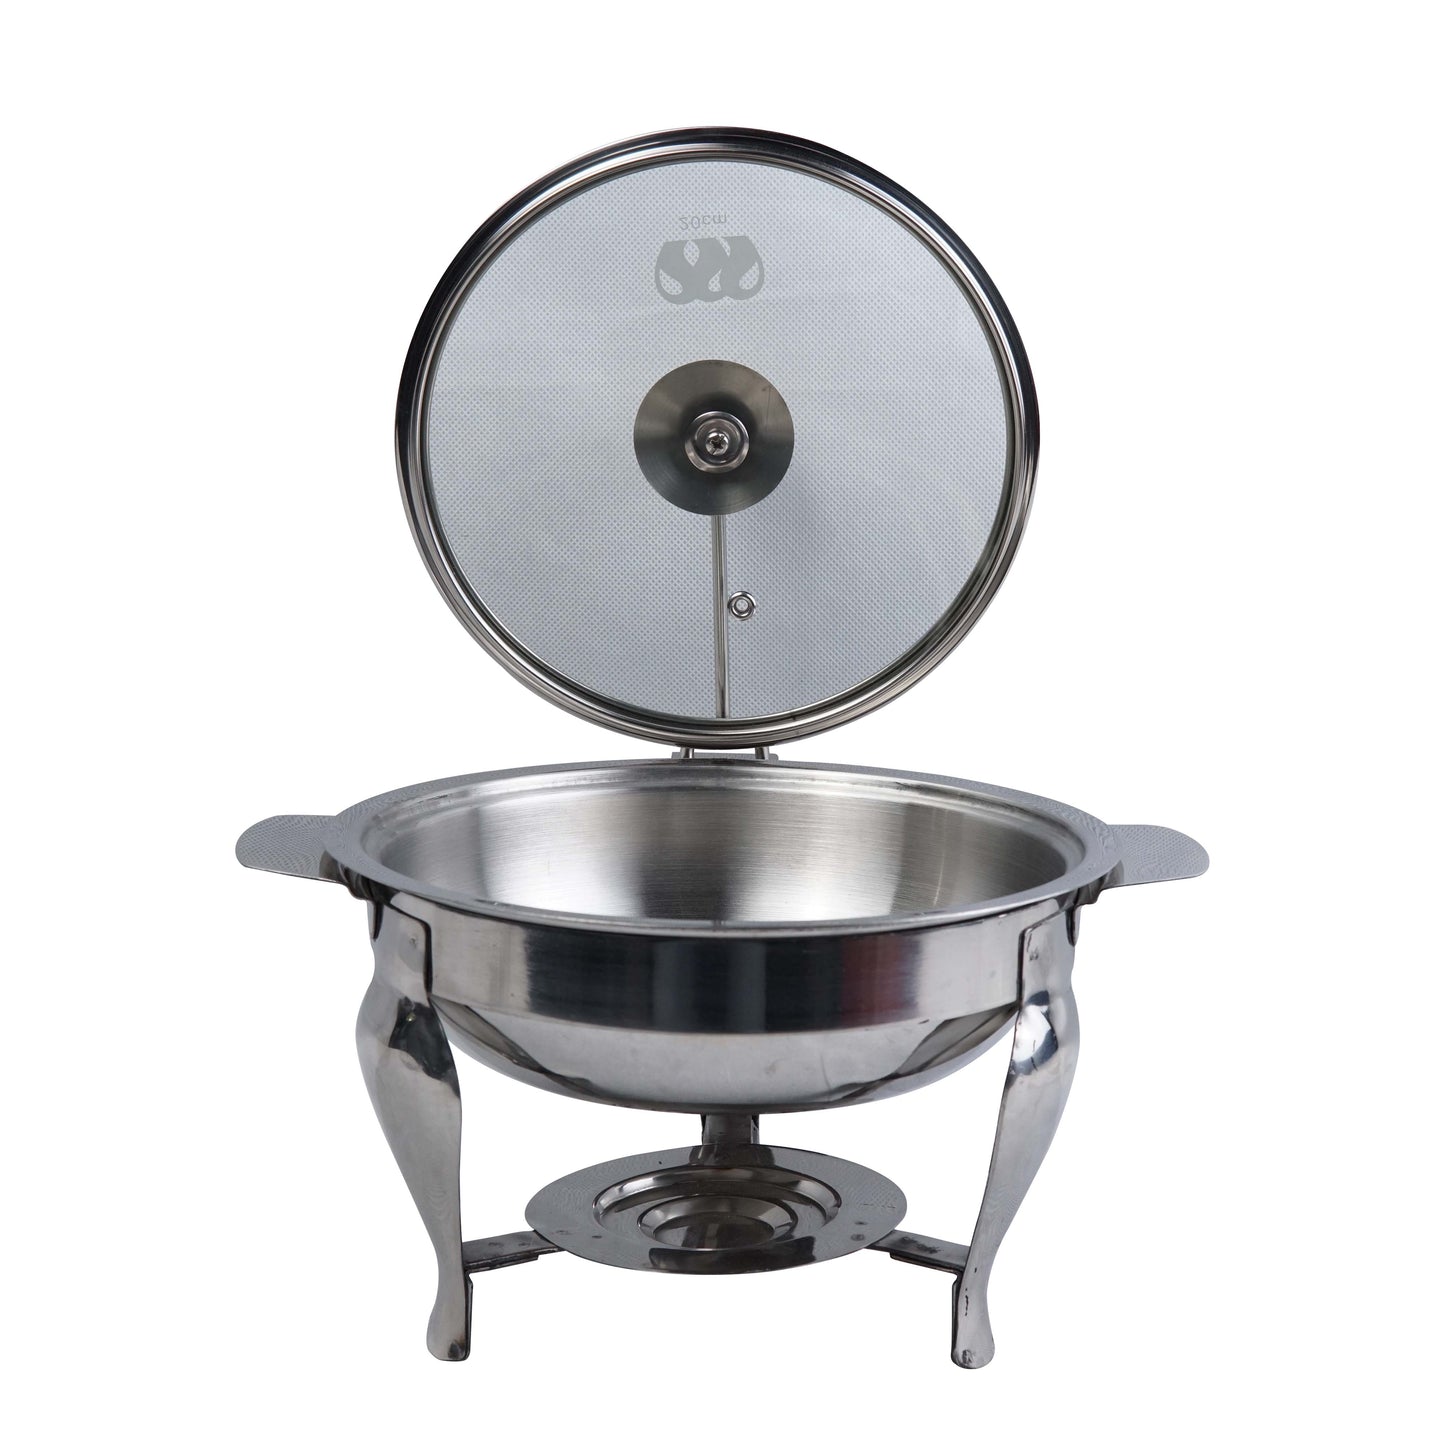 Stainless steel Chafing Dish, Food Warming Buffet Serving Pot Design 01 (20cm) with Tealight Candle